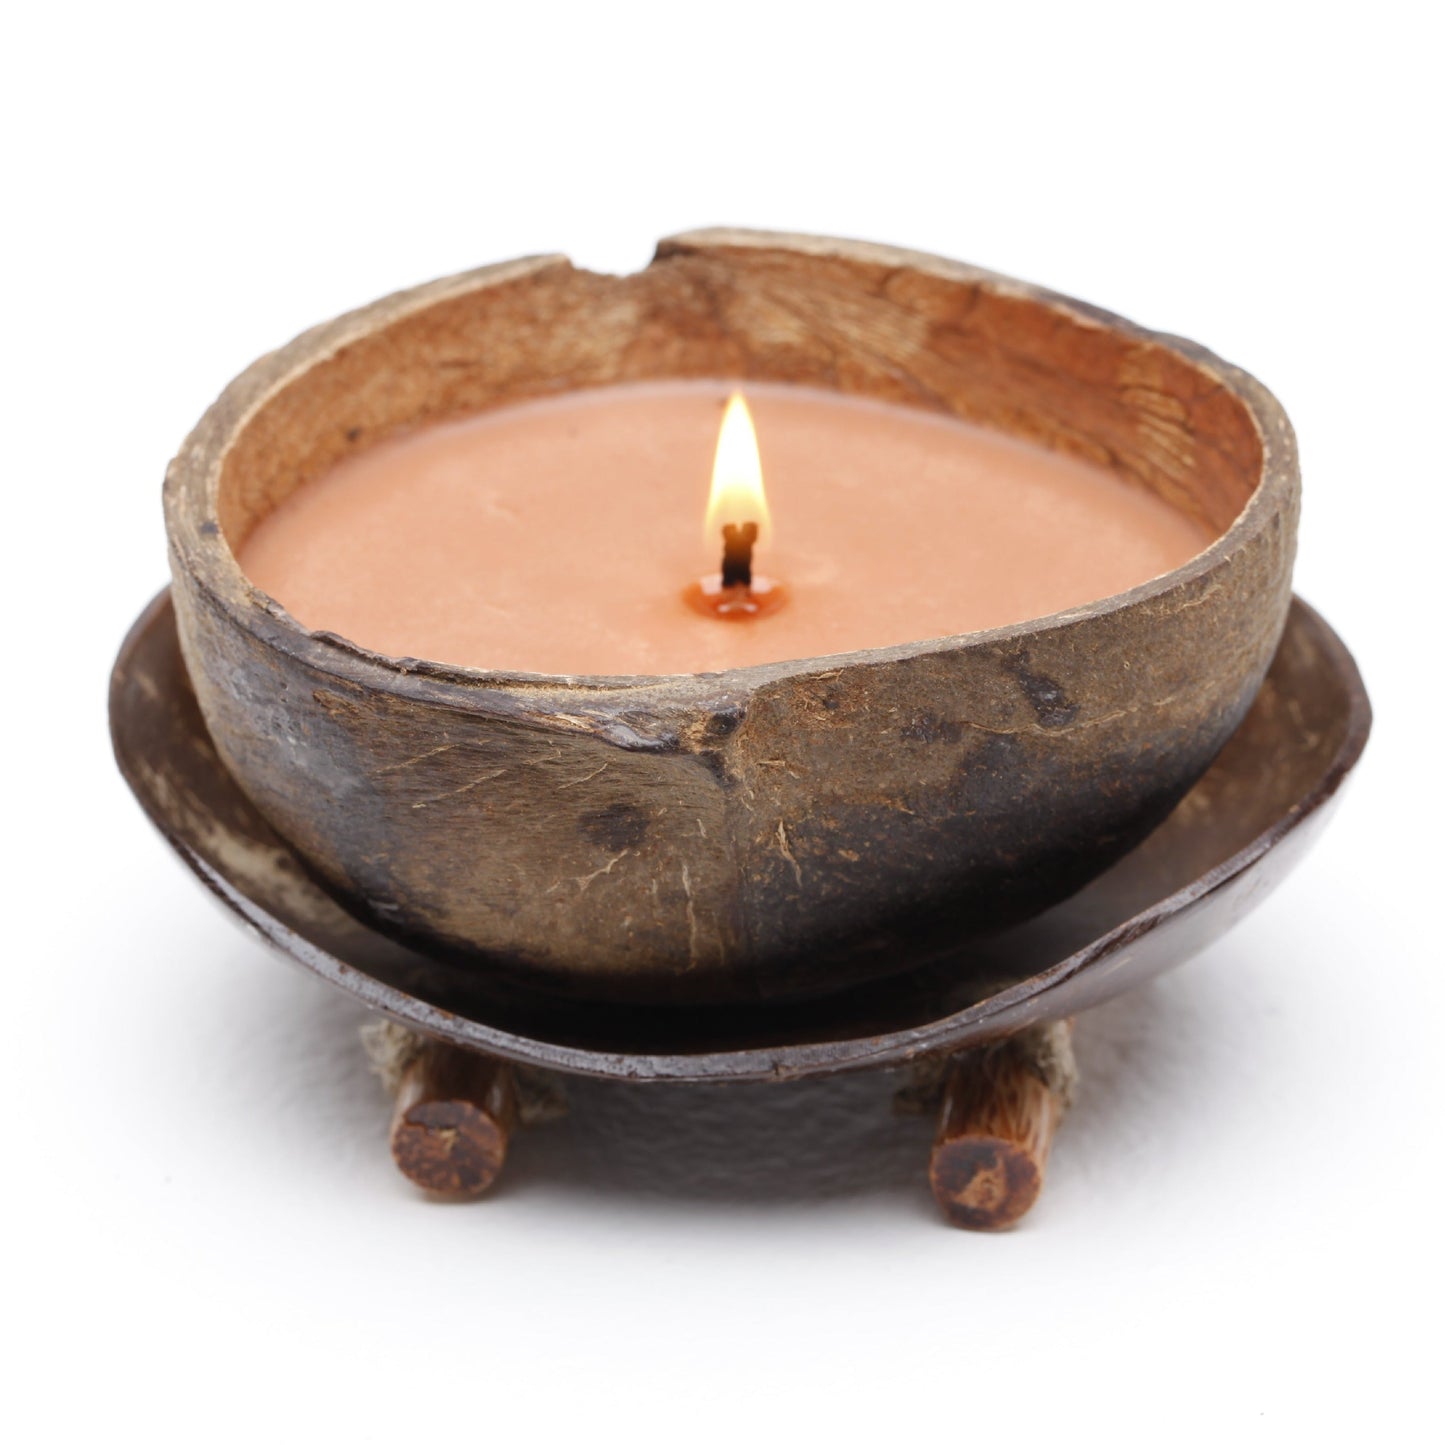 coconut candle tray